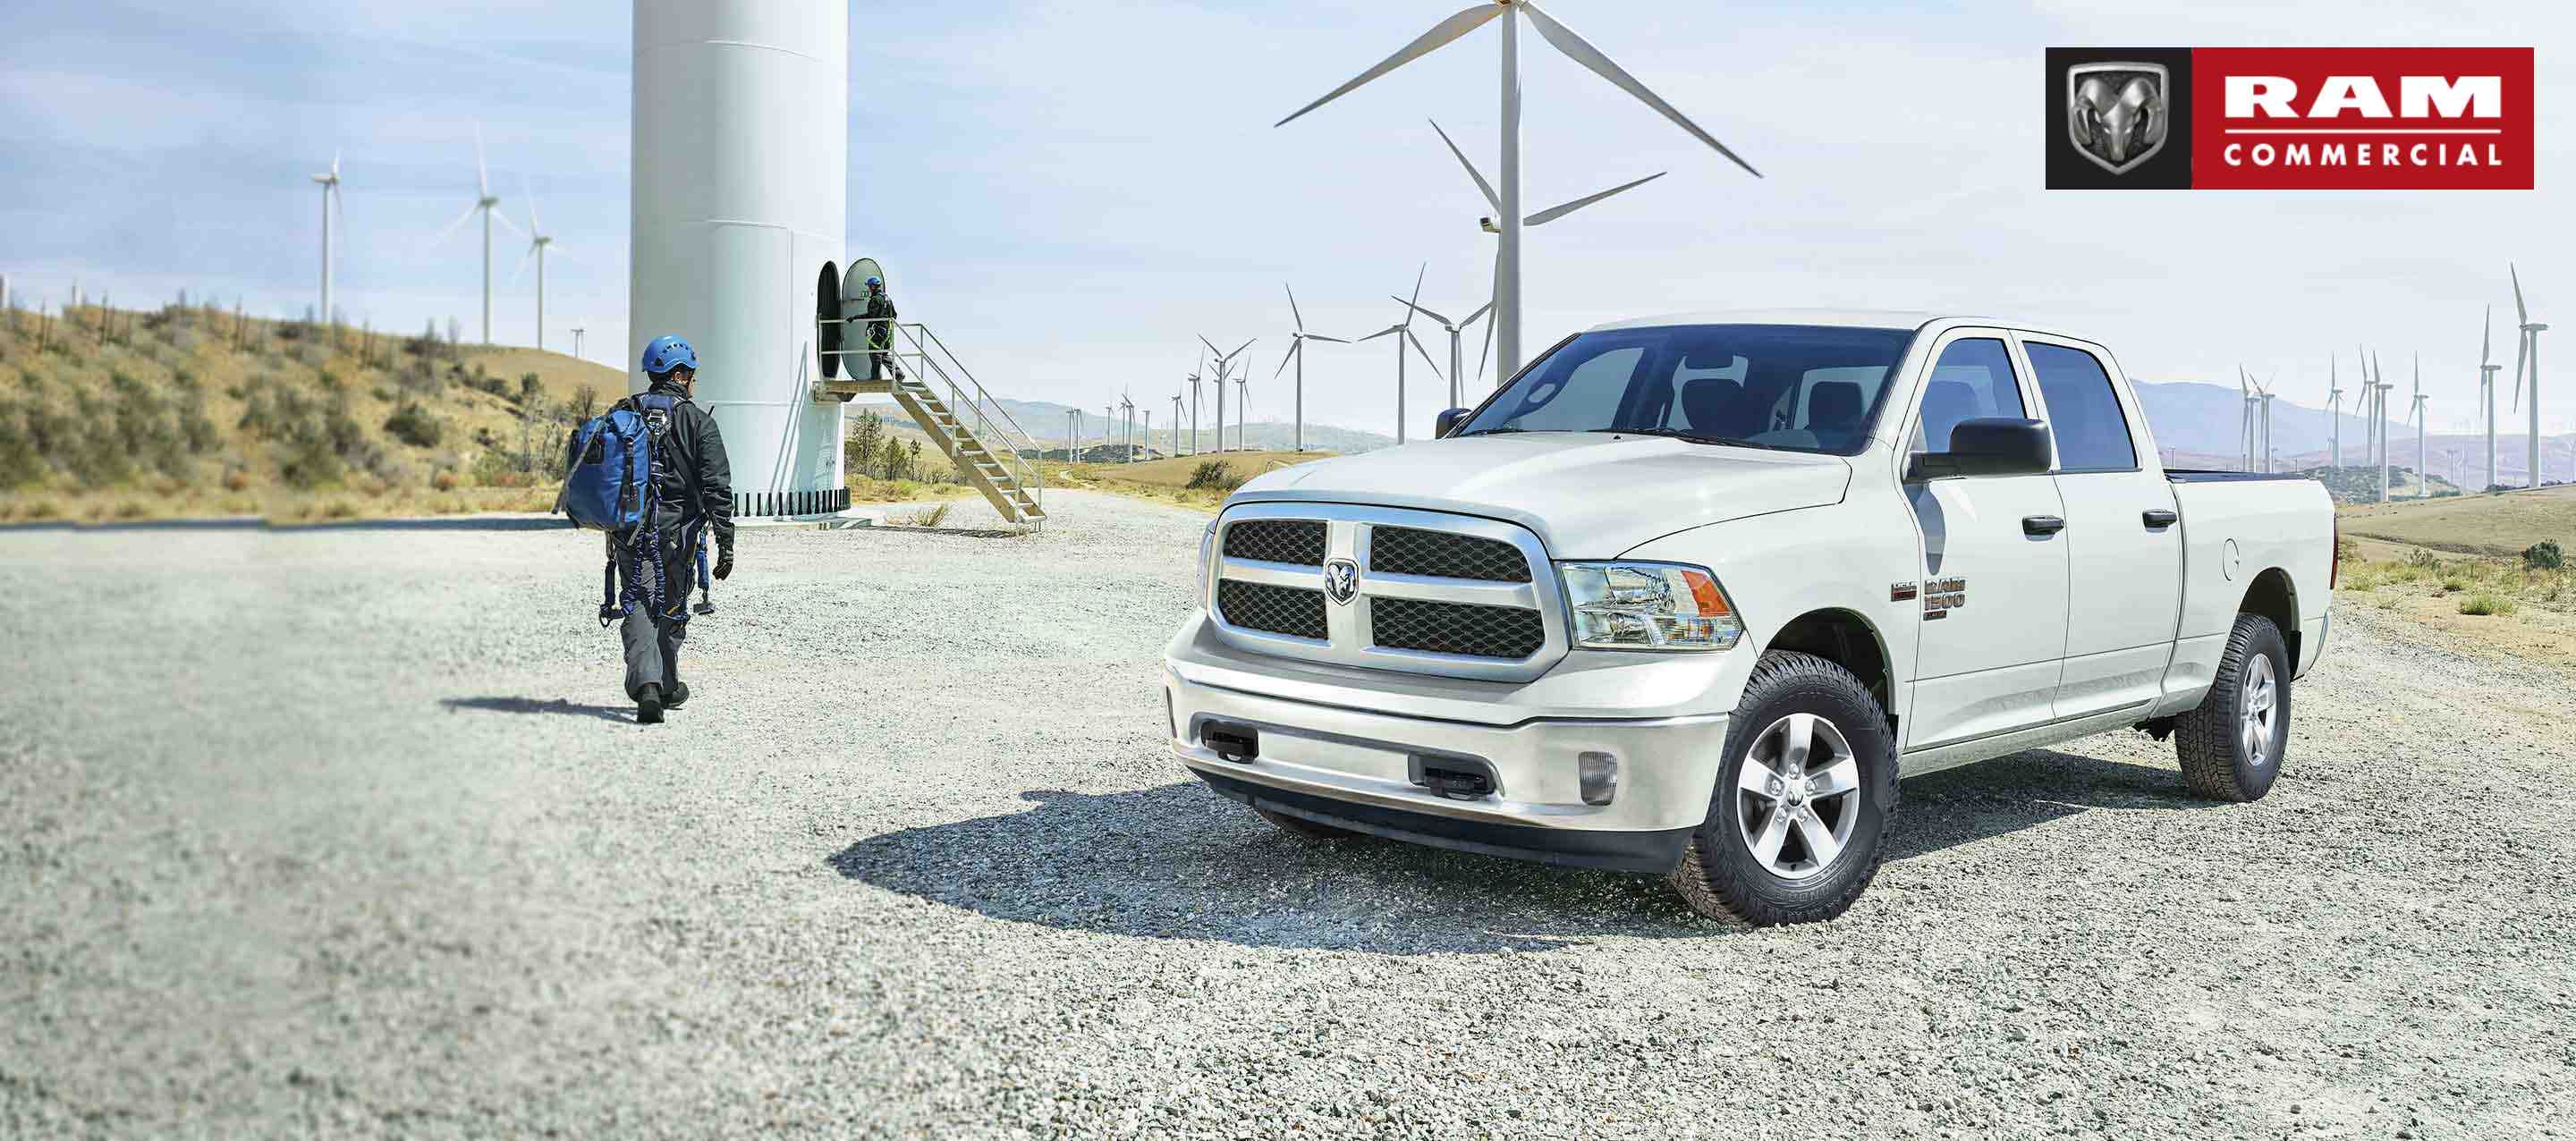 A 2022 Ram 1500 Classic Tradesman 4x4 Crew Cab parked on a wind farm. Ram Commercial Truck Season. Ram Commercial.